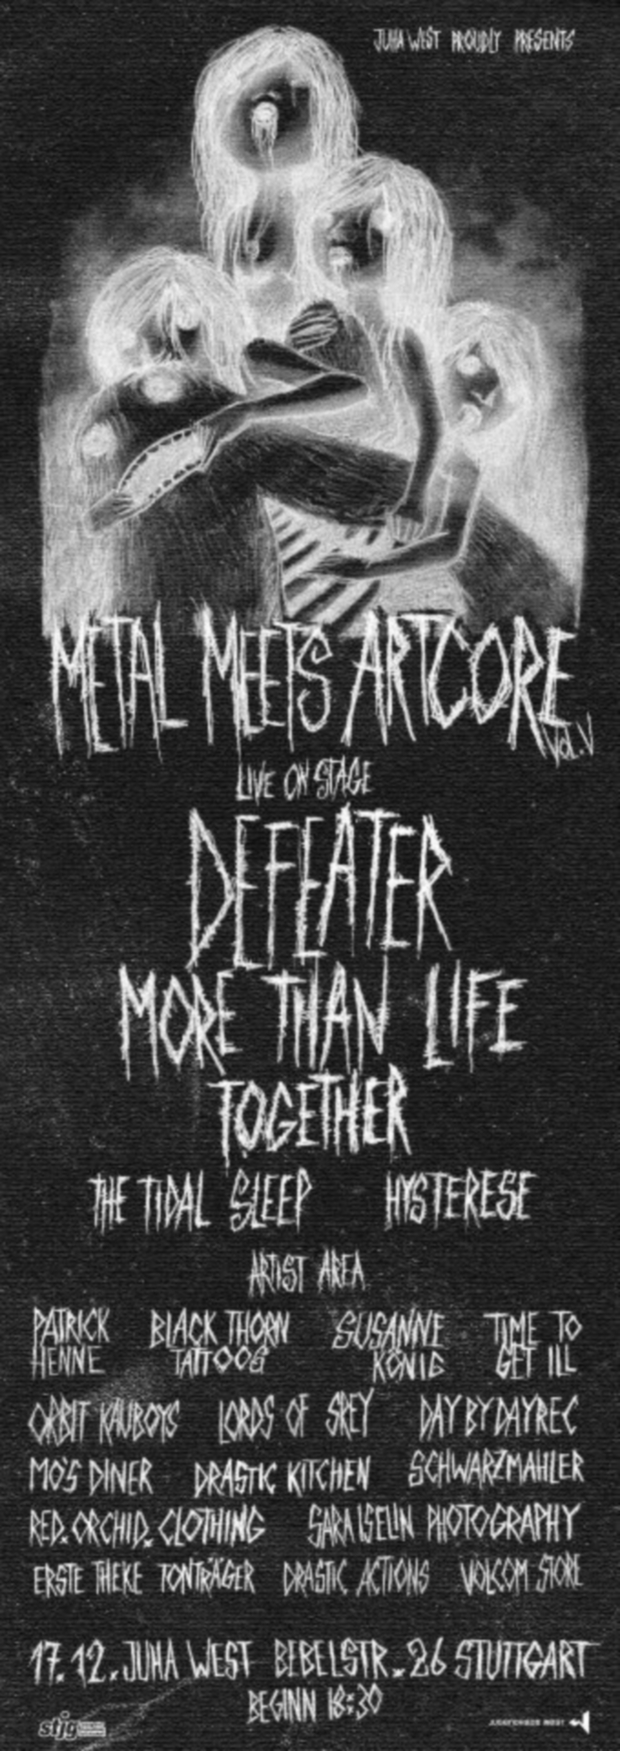 Defeater1